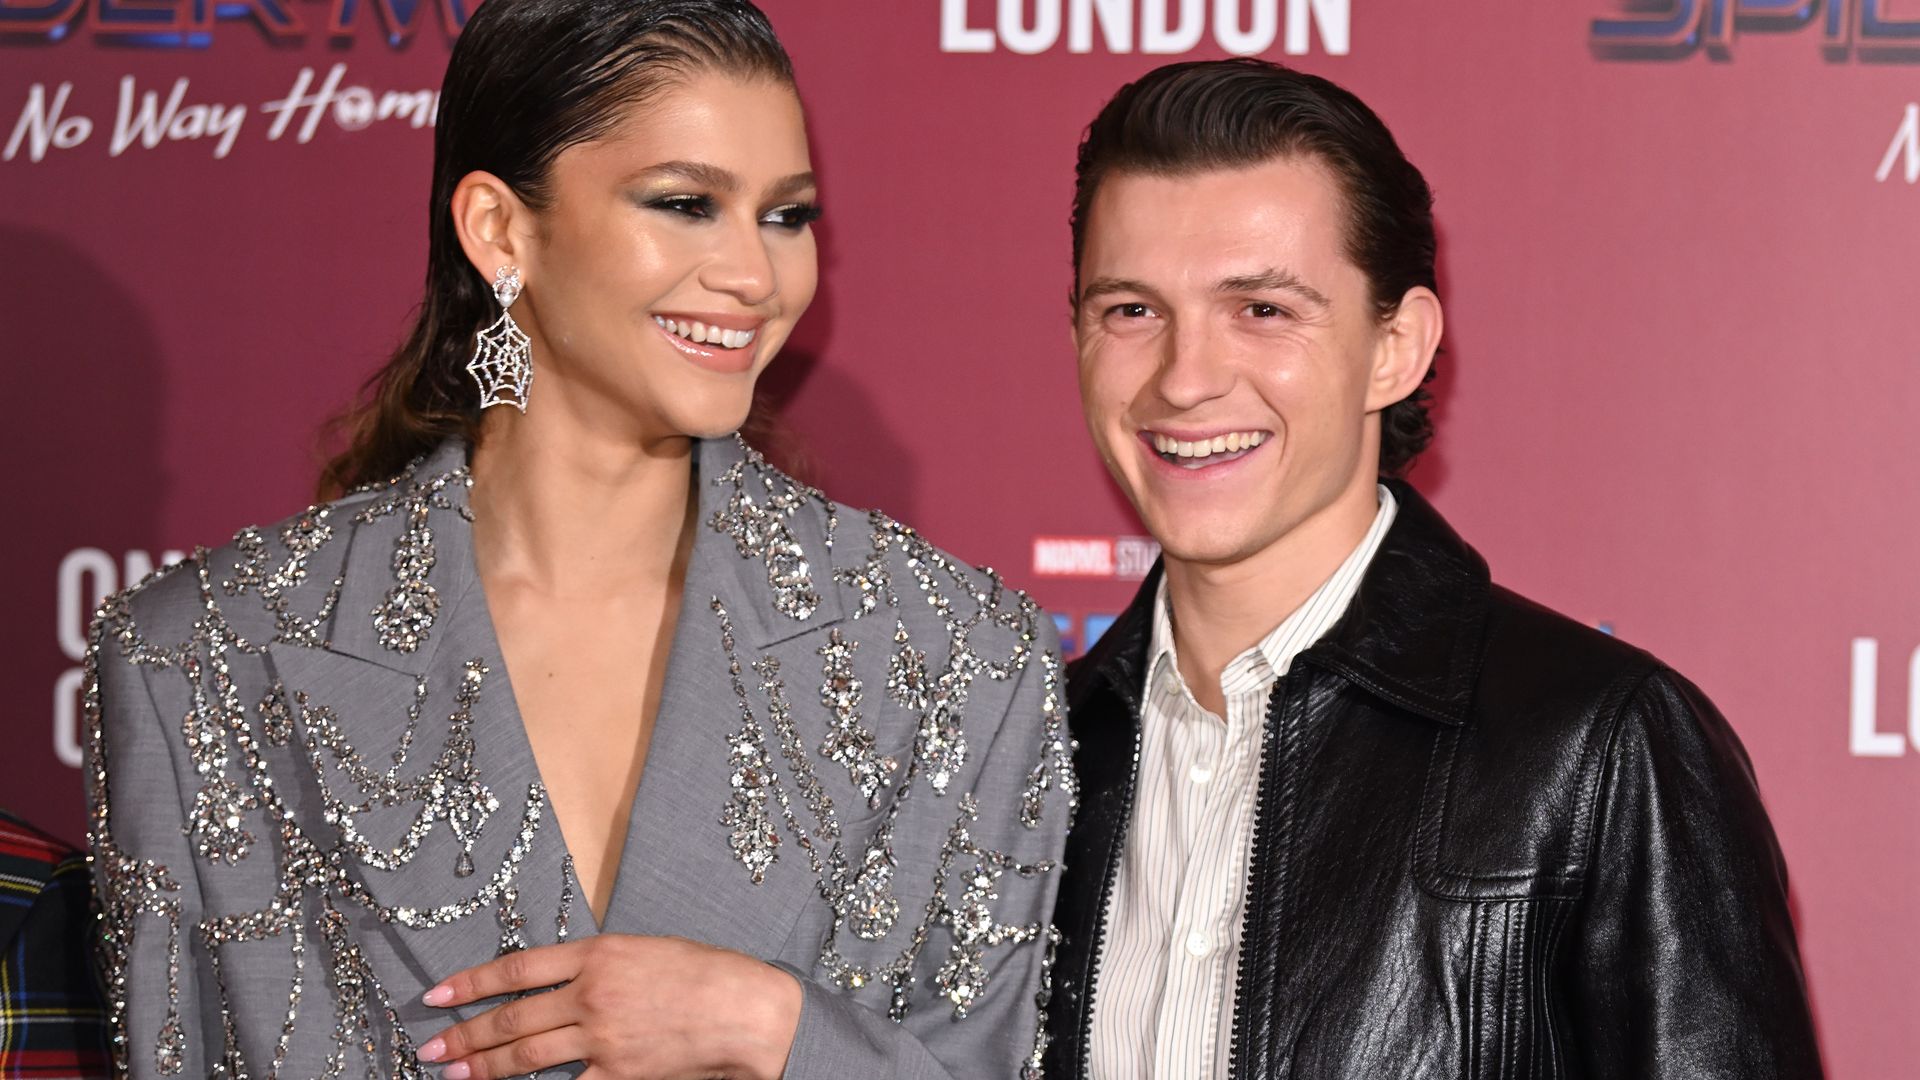 Tom Holland and Zendaya smiling on a red carpet